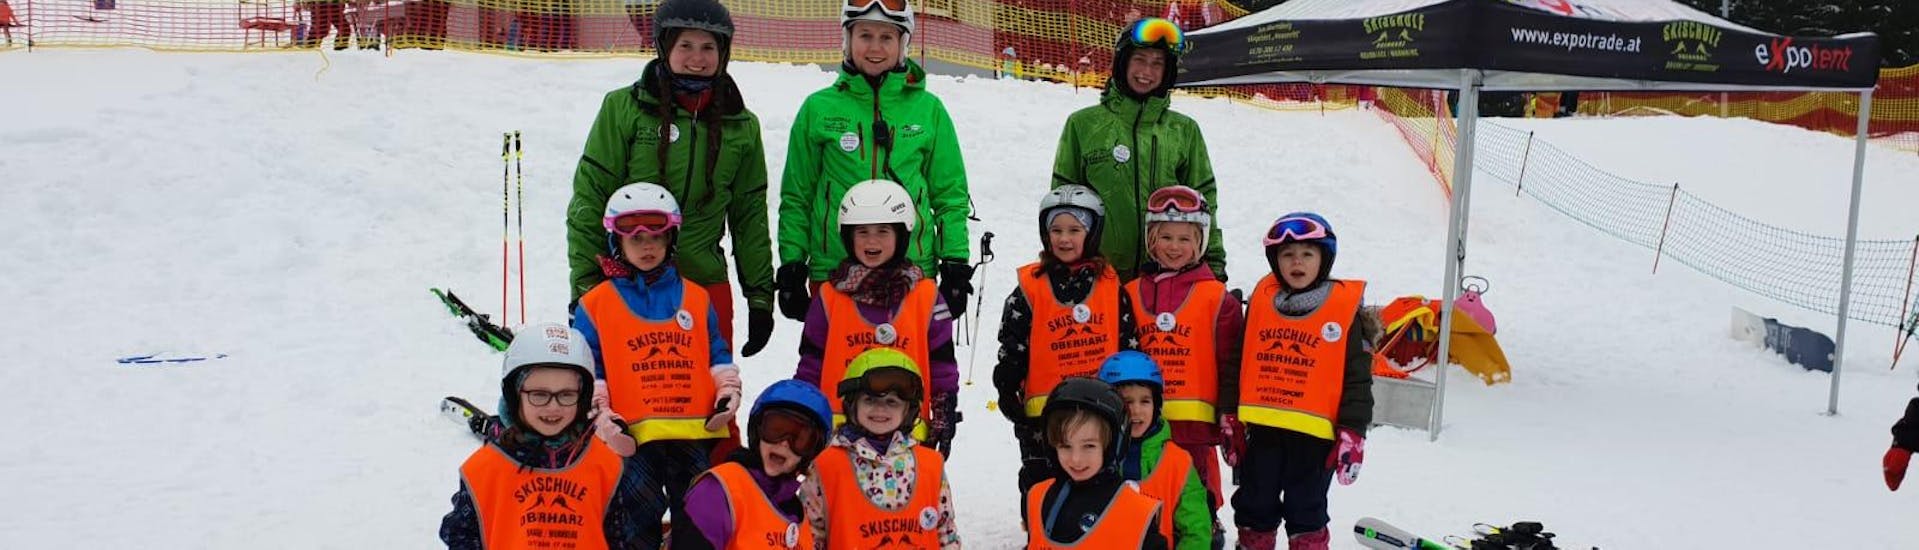 Kids Ski Lessons (9-11 y.) for Skiers with Experience.